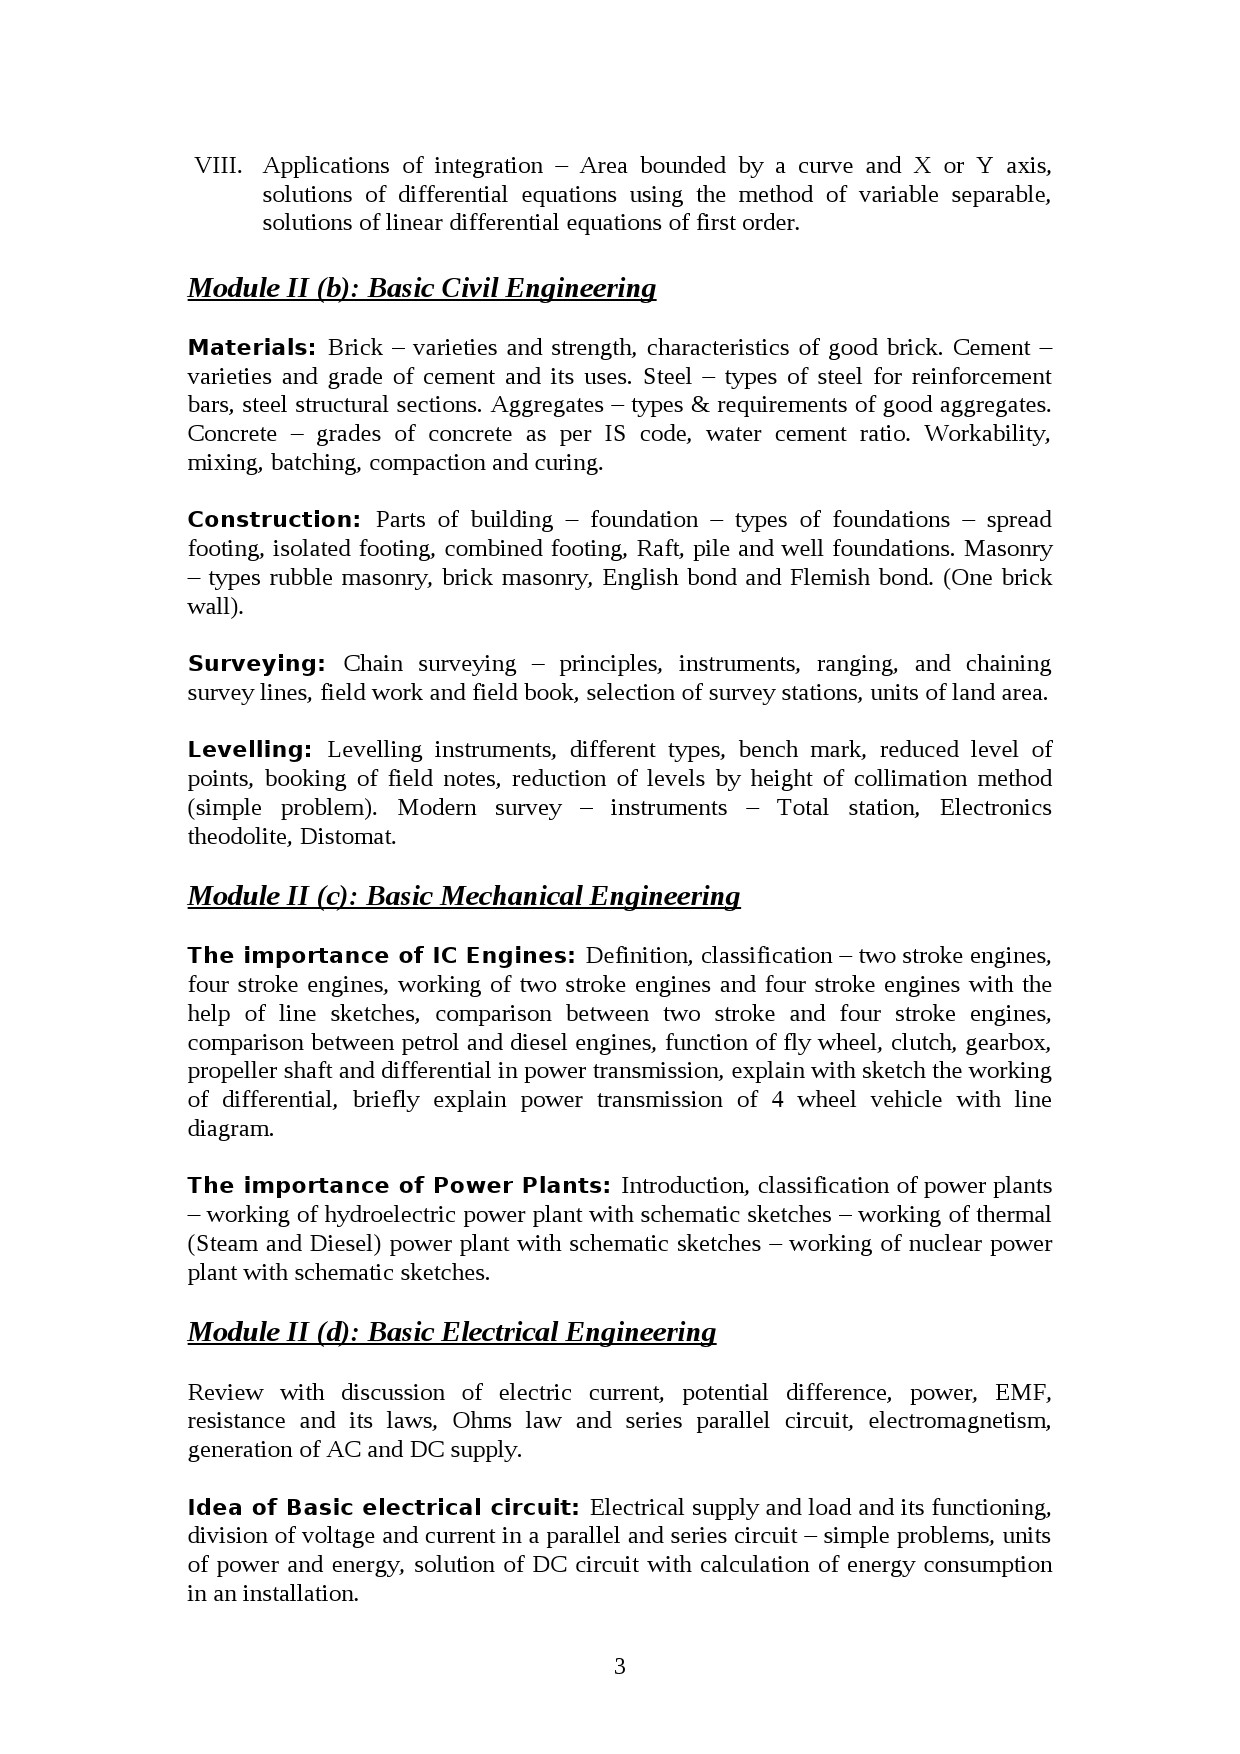 Architecture Lecturer in Polytechnic Exam Syllabus - Notification Image 3